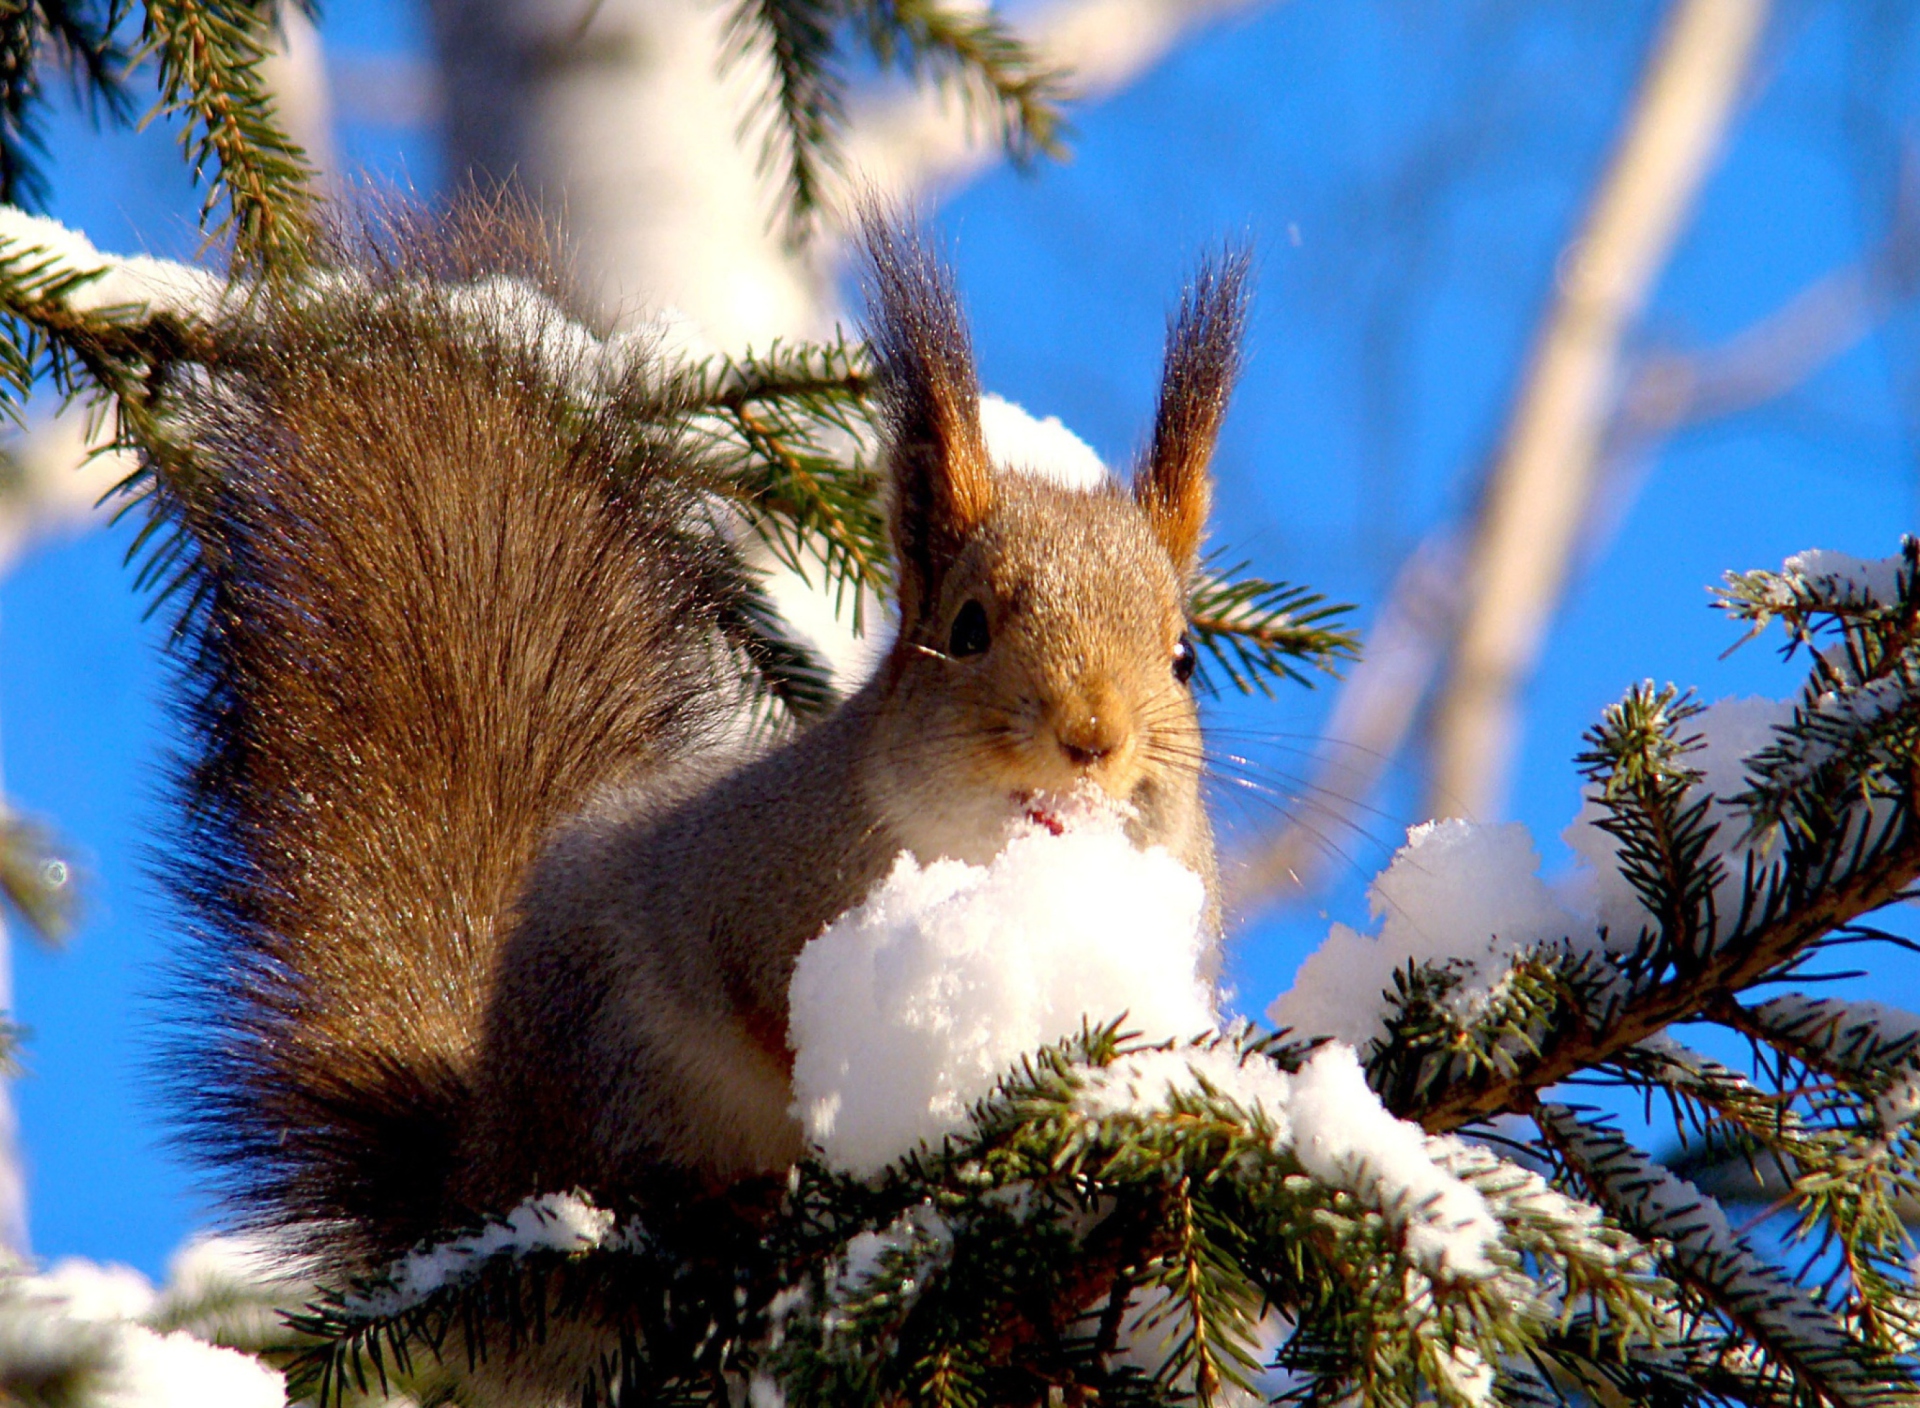 Squirrel Eating Snow wallpaper 1920x1408